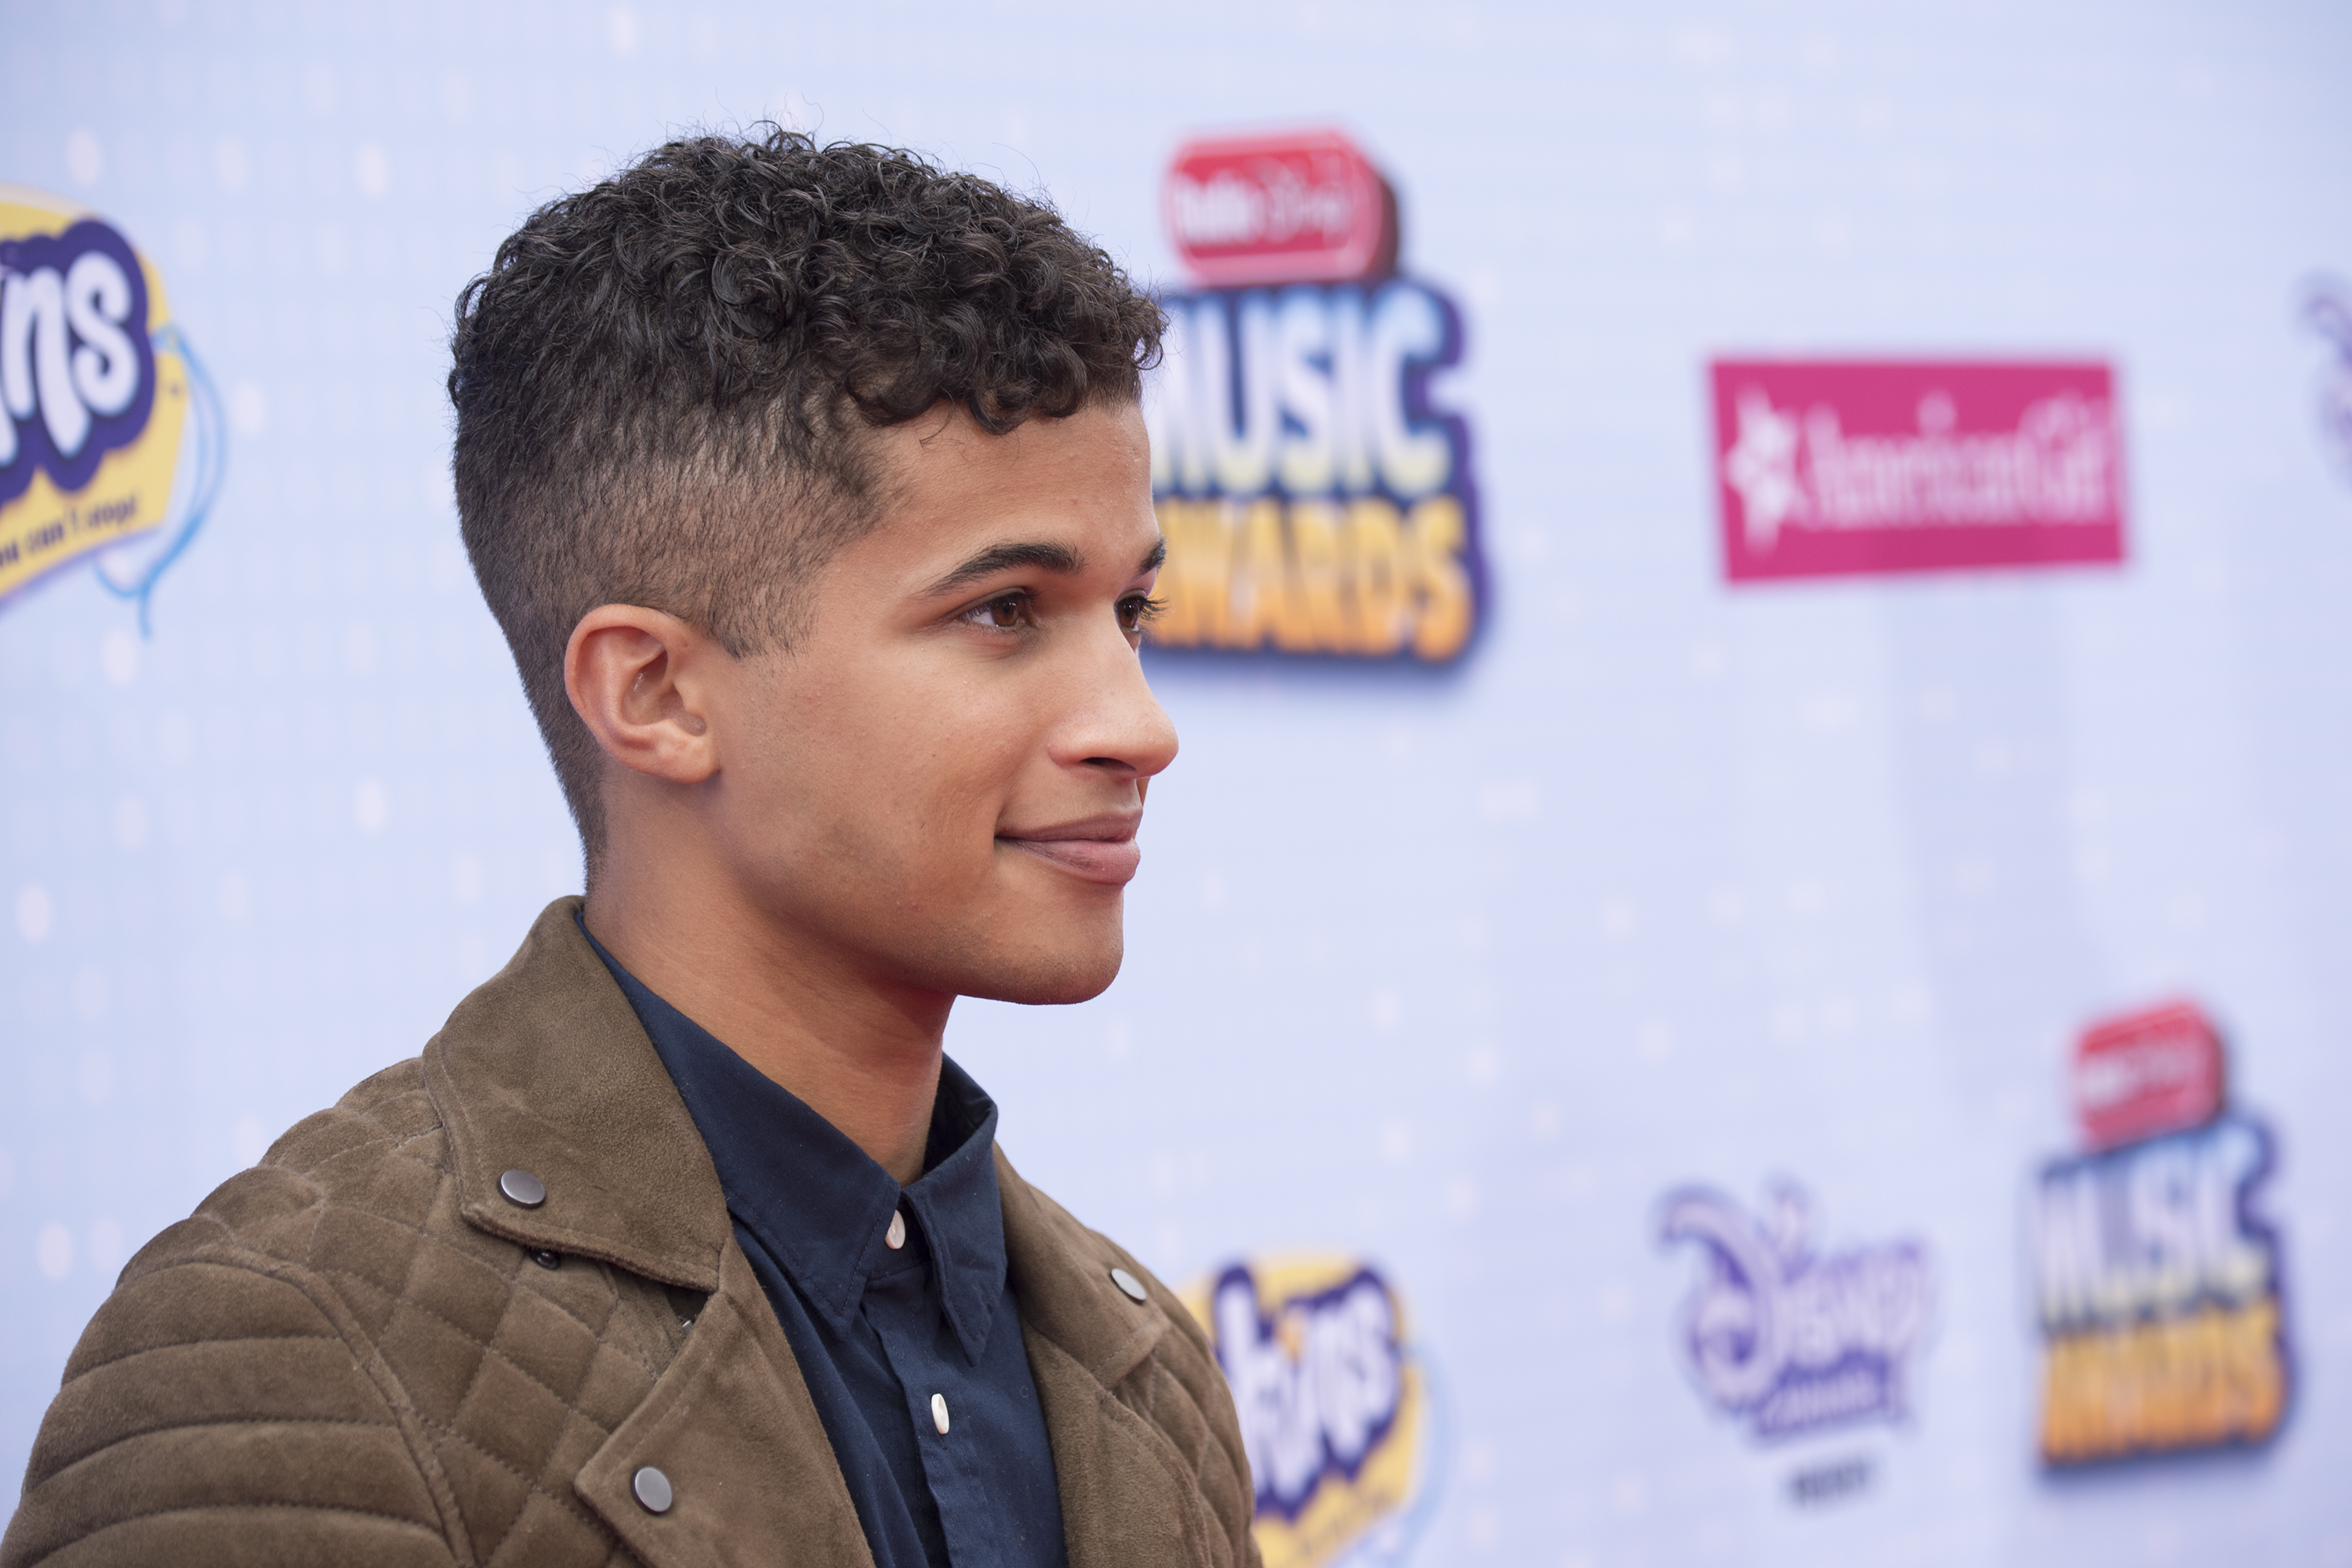 4 interesting facts about JSU, the uni Jordan Fisher attended